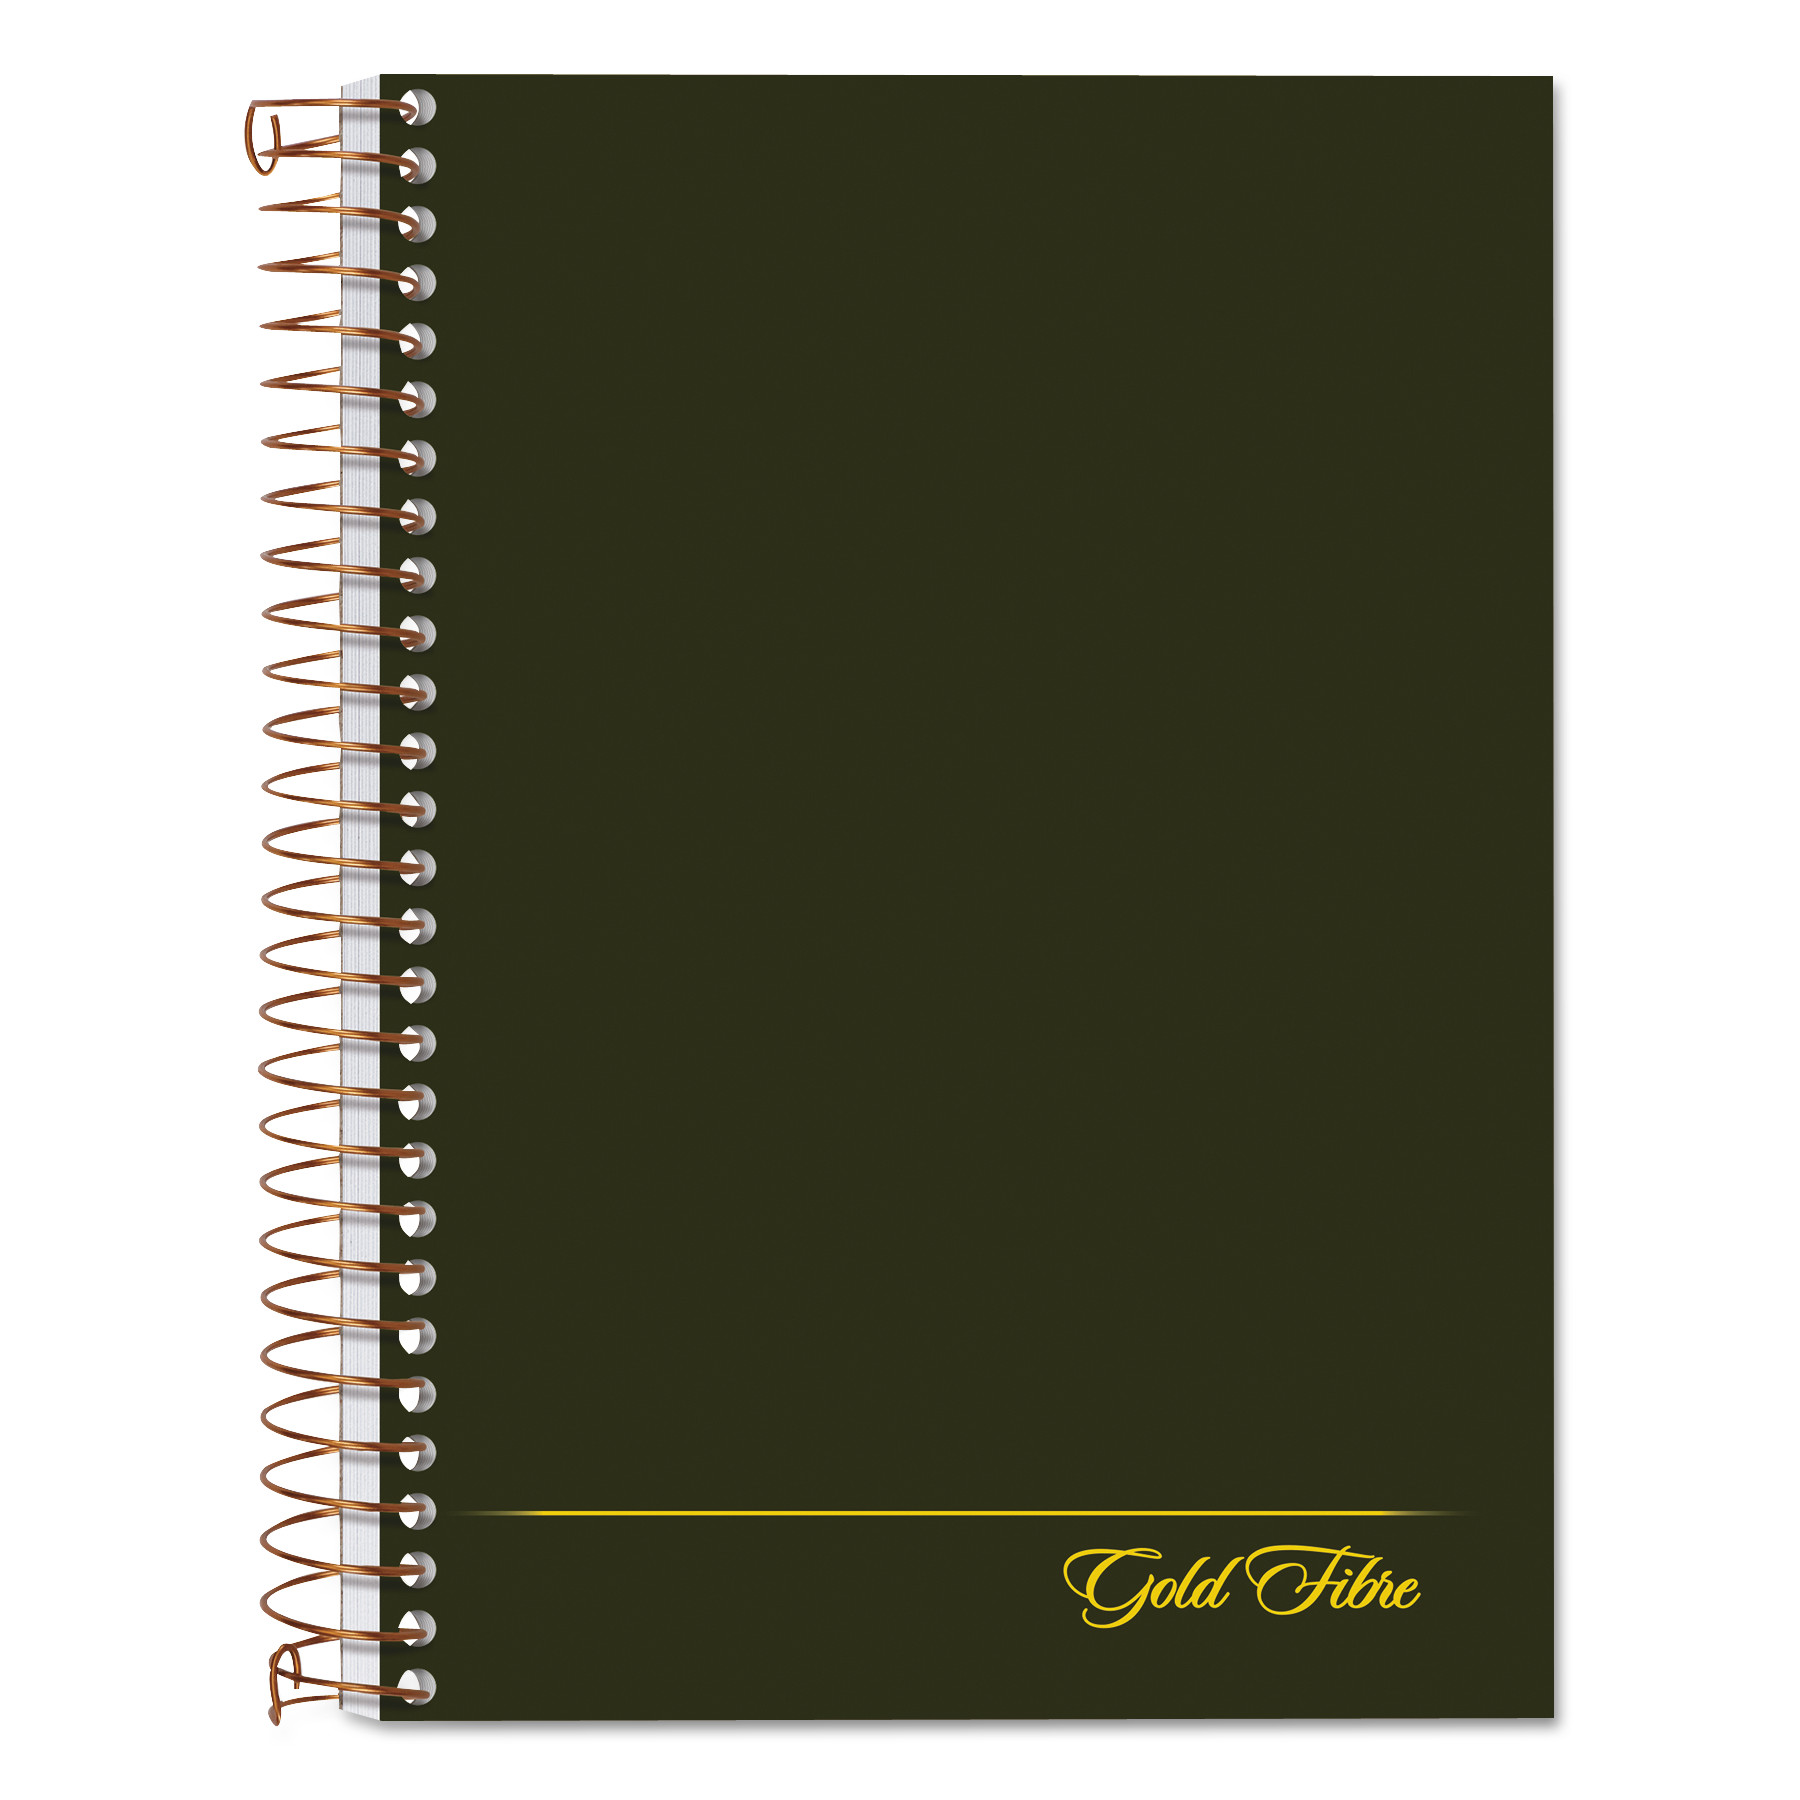  Ampad 20-801R Gold Fibre Personal Notebooks, 1 Subject, Medium/College Rule, Classic Green Cover, 7 x 5, 100 Sheets (TOP20801) 